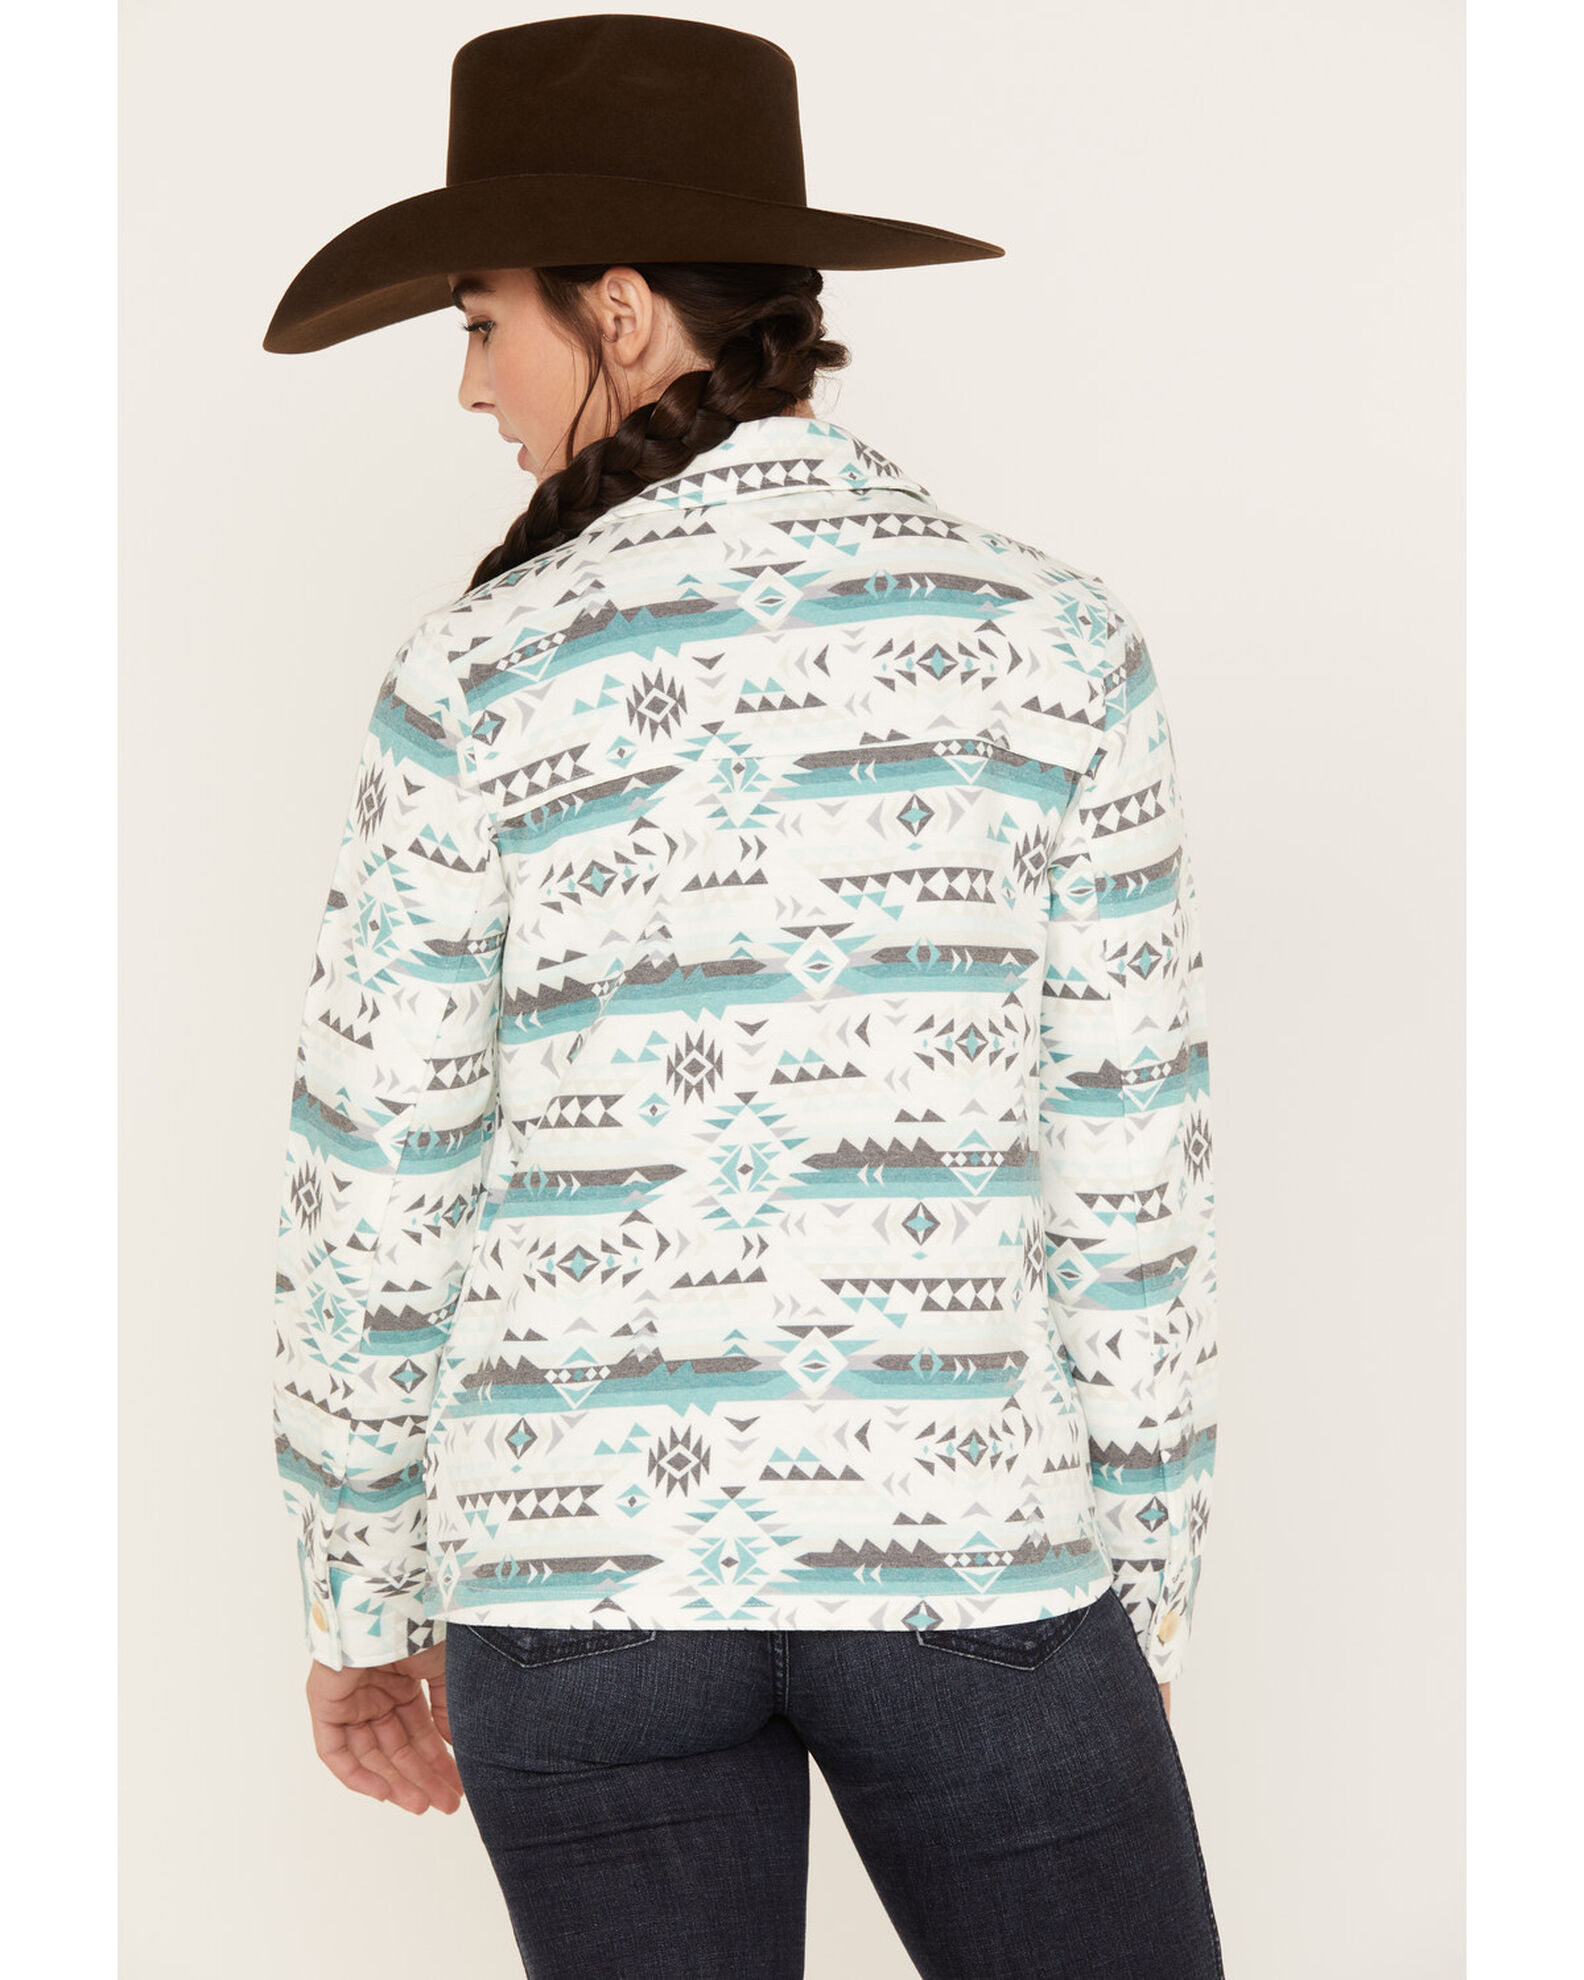 Product Name: RANK 45® Women's Southwestern Print Quilted Shacket